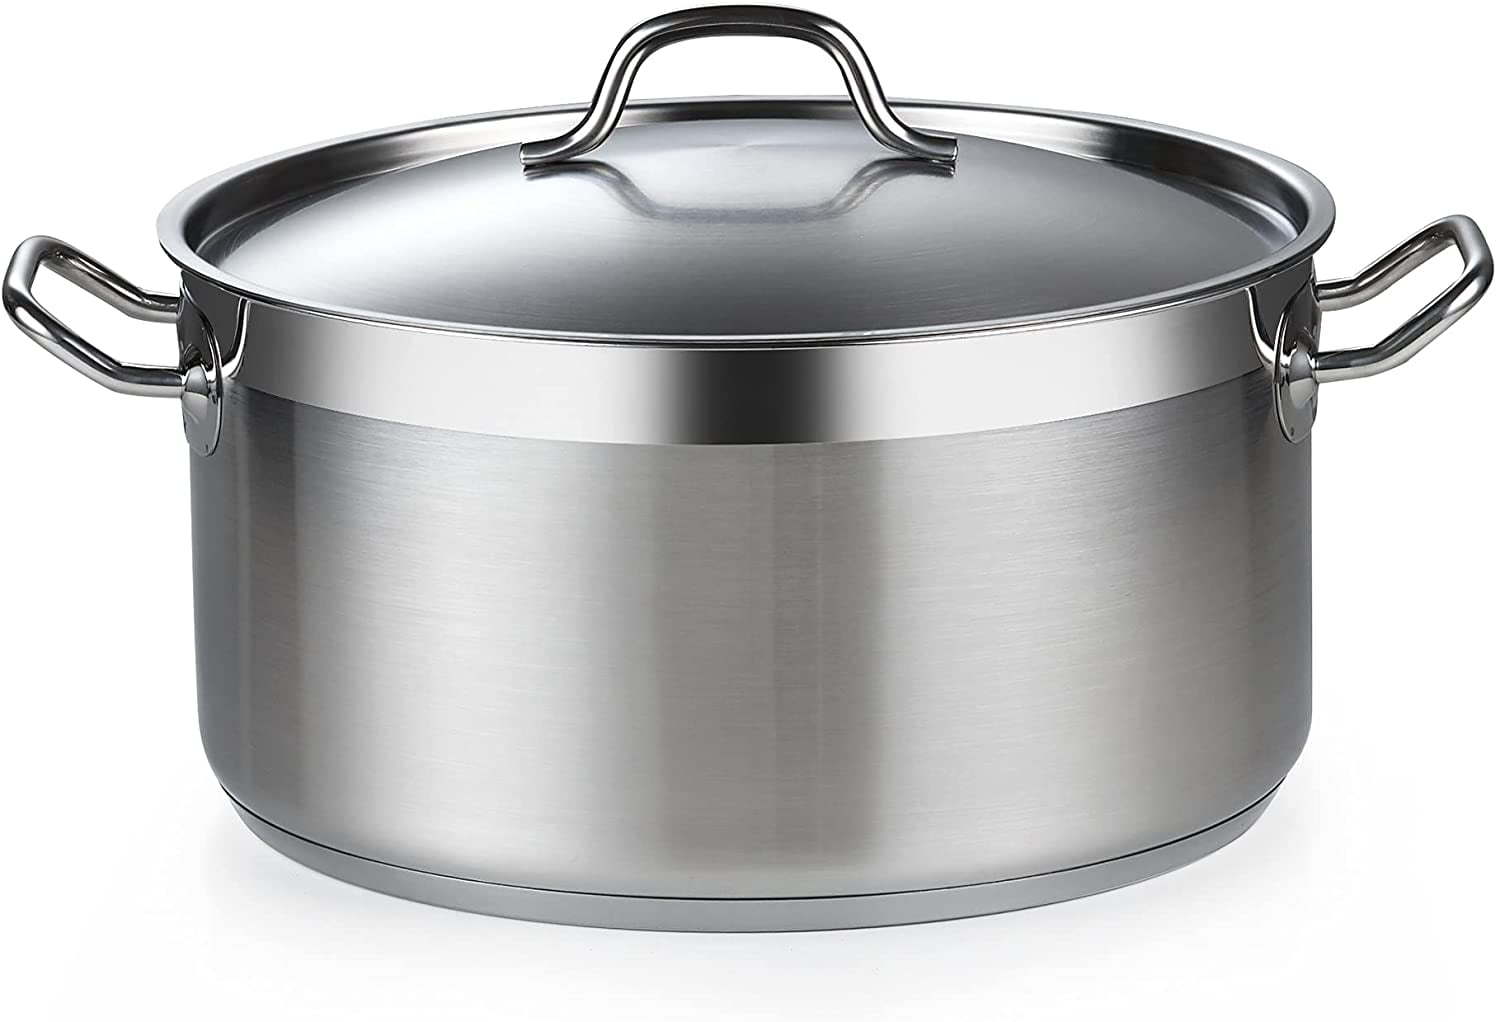 Food Grade Stainless Steel Heavy Duty Induction - Large Stock Pot, Stew Pot,  Simmering Pot, Soup Pot with See Through Lid, Dishwasher Safe - China  Stainless Steel Casserole and Stainless Steel Cookware